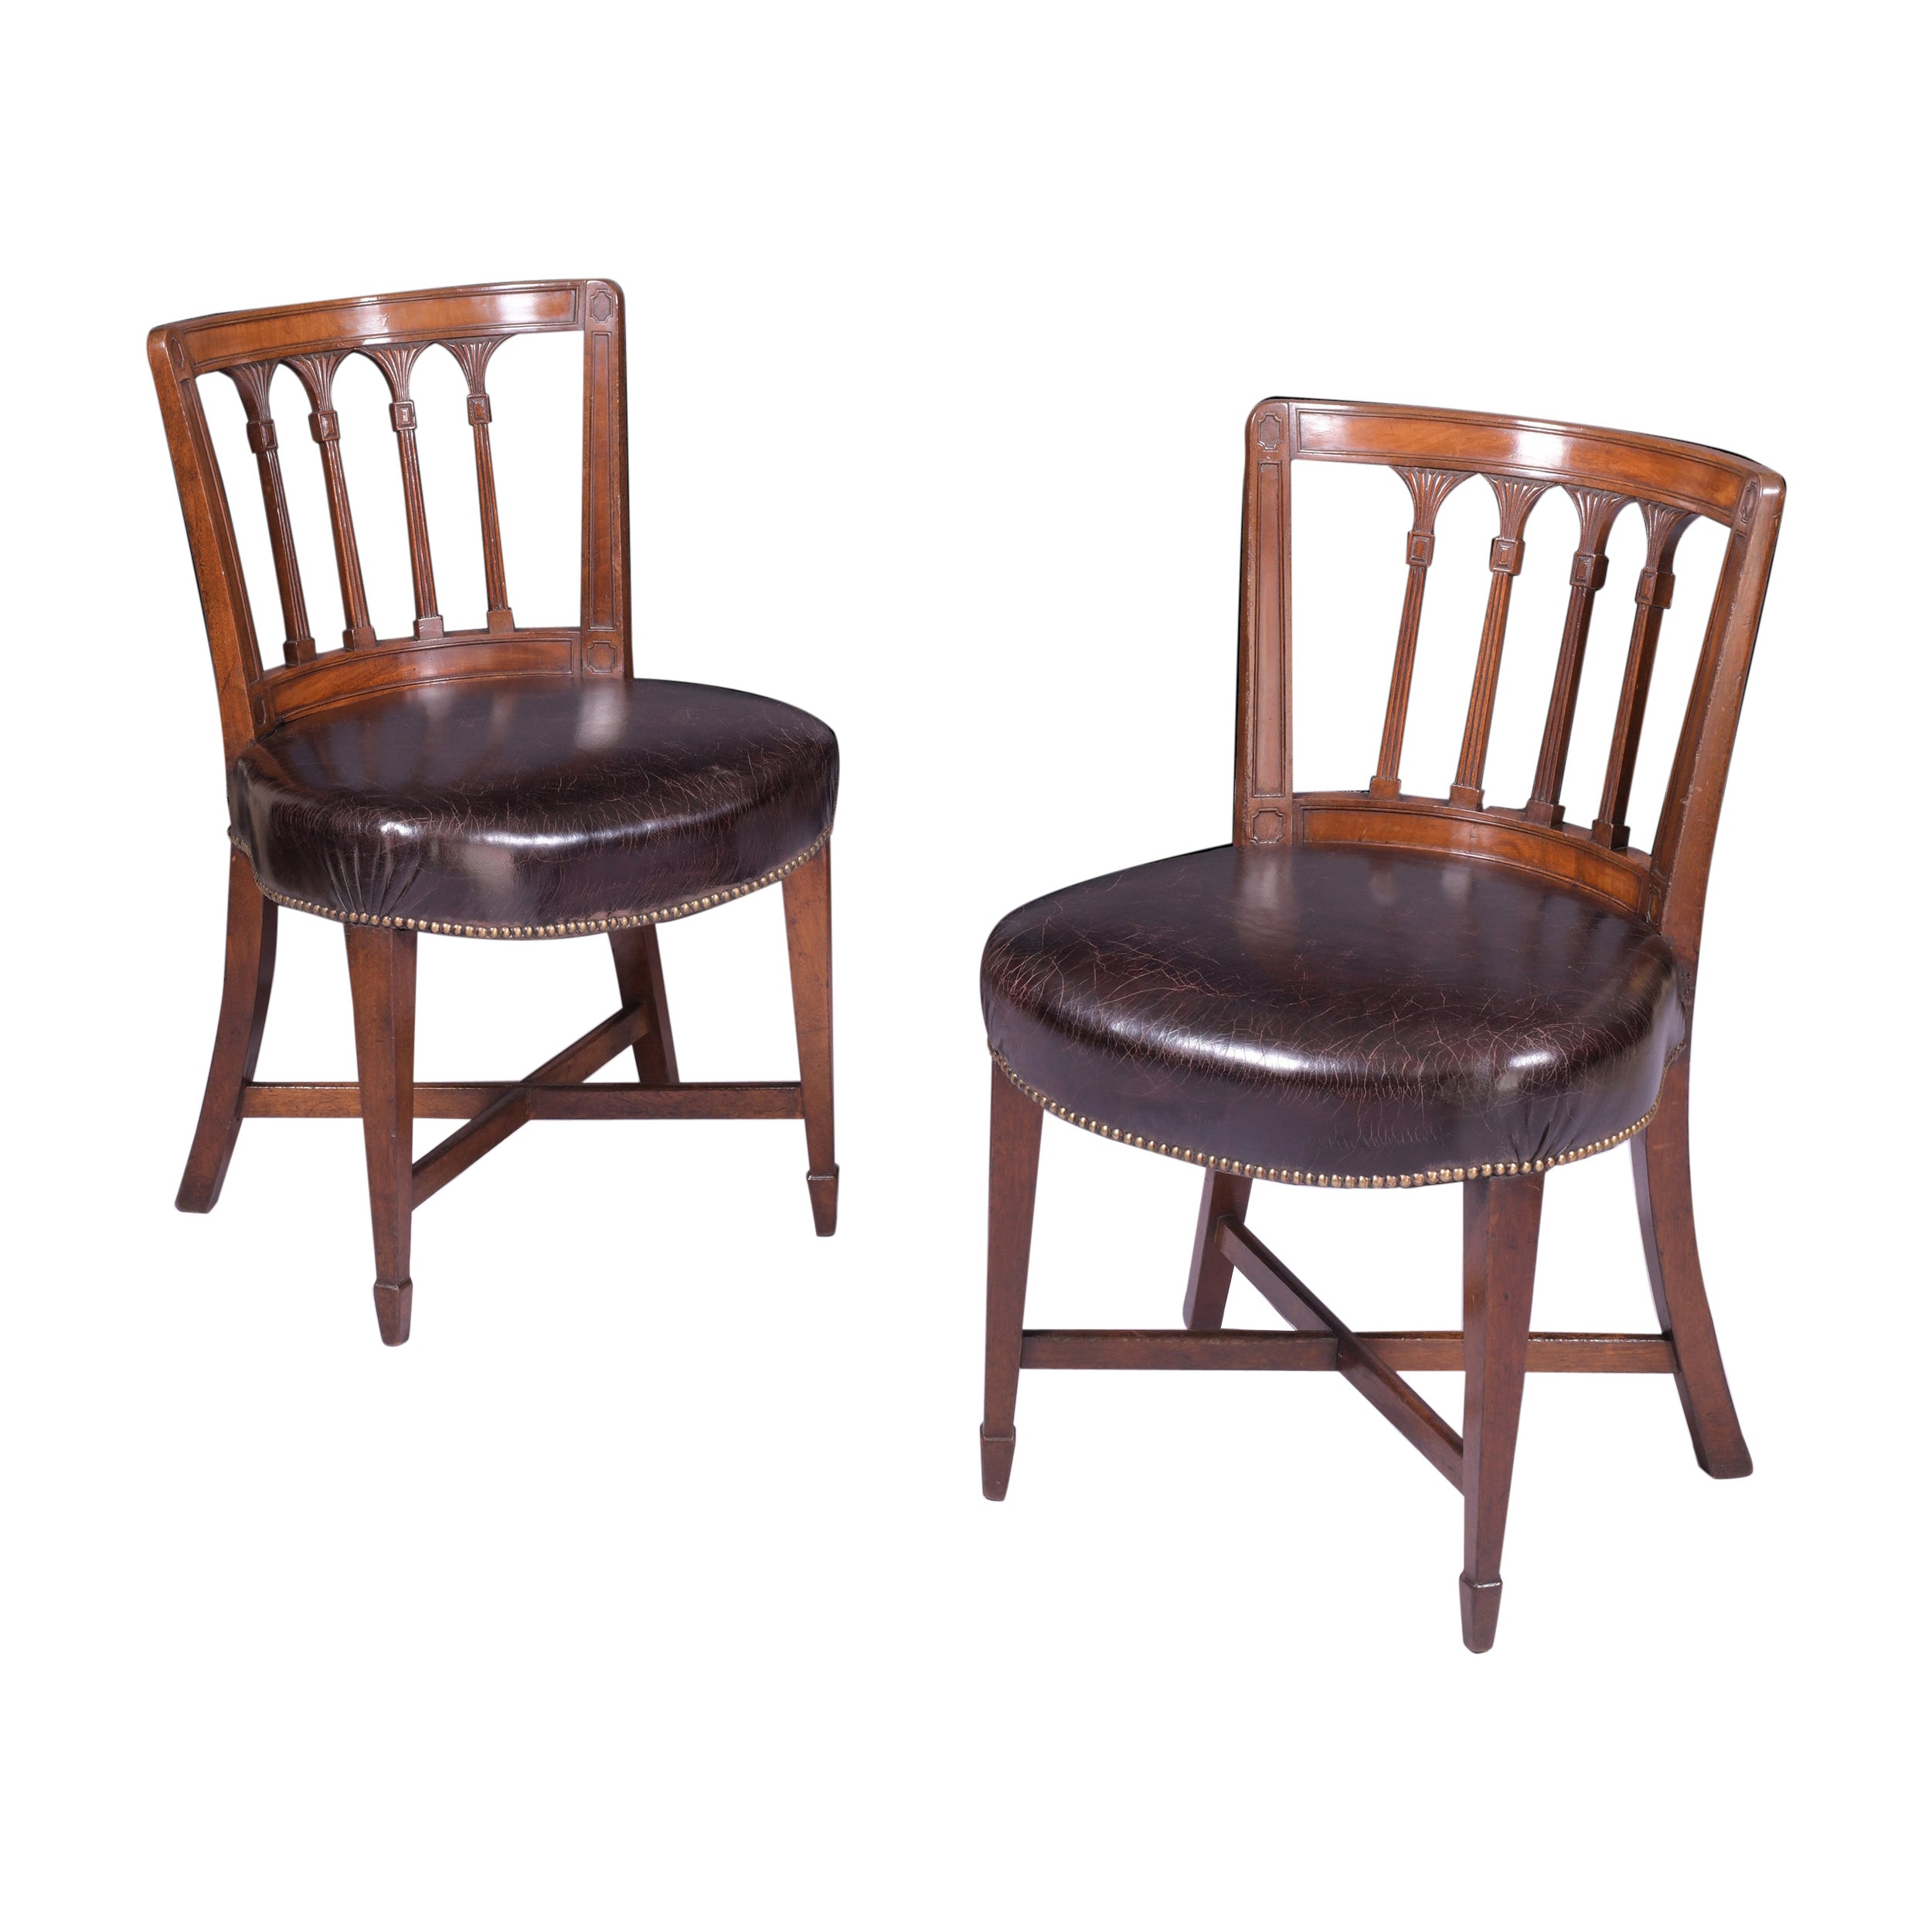 Pair of Early 19th Century Side Chairs Attributed to Gillows of Lancaster For Sale